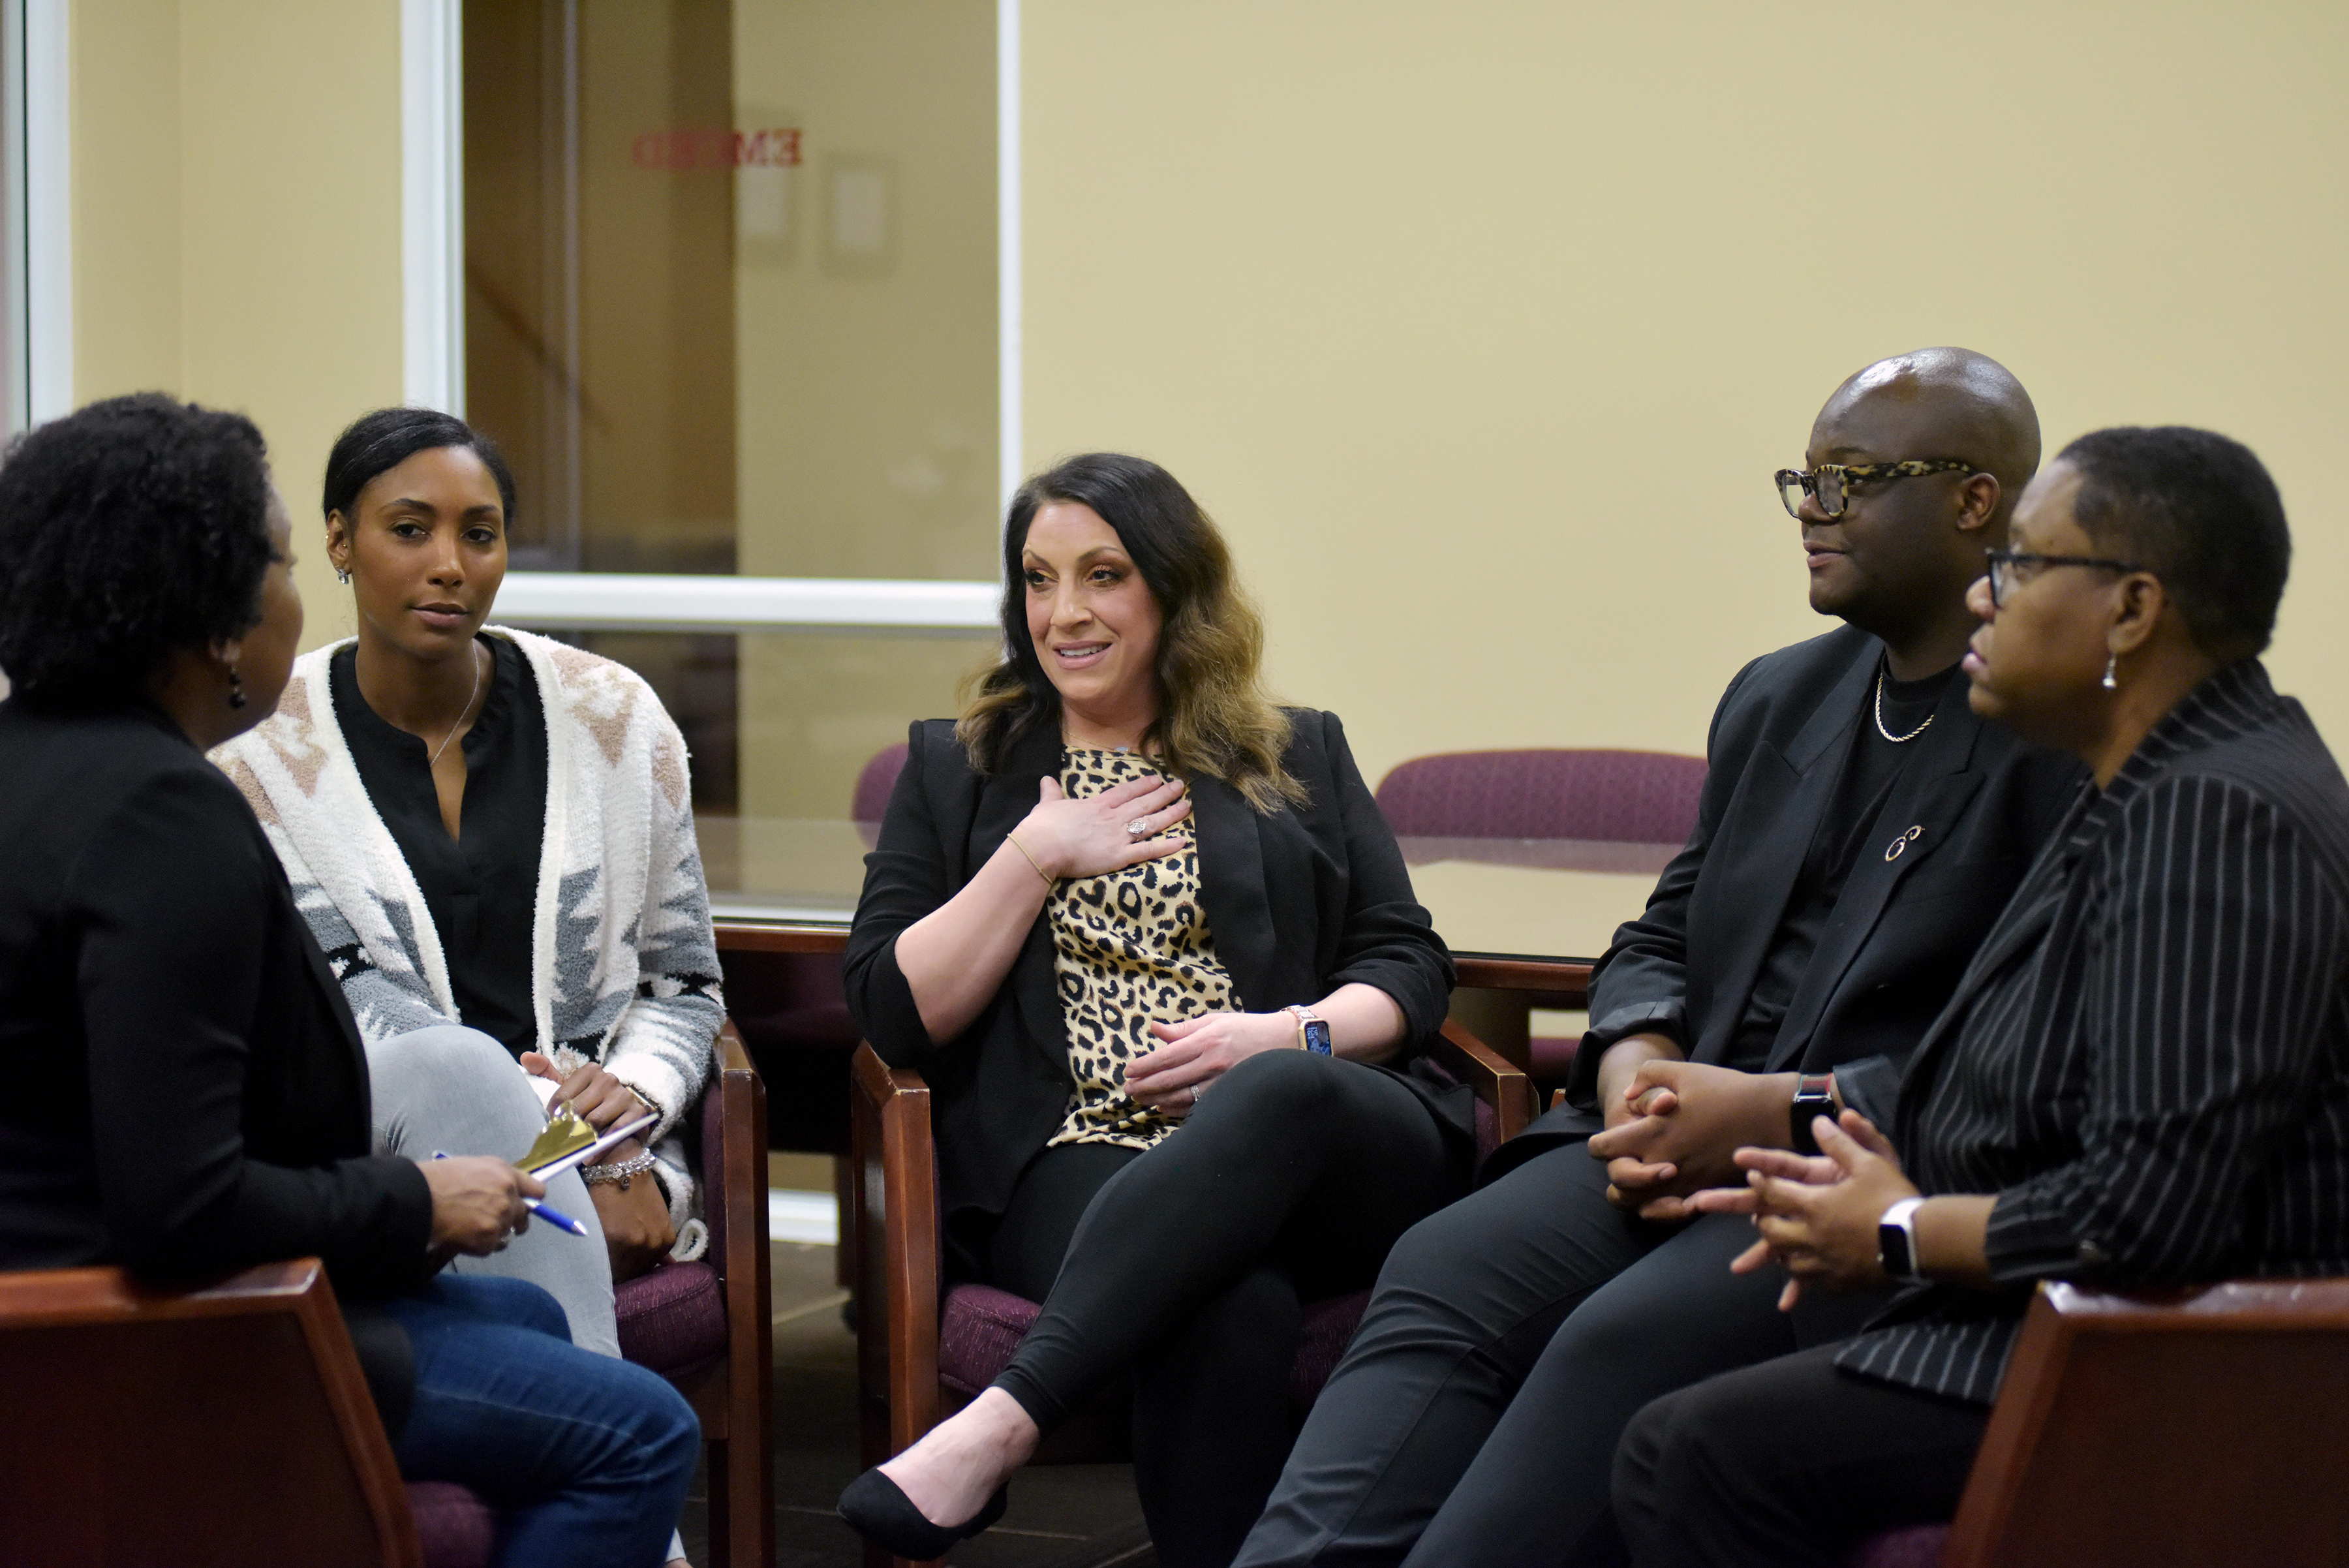 MSU-Meridian's planned Behavioral Health Center will fill a much-needed gap in community mental health treatment while positioning students for mental health and psychology careers. Pictured here are (from left to right) Tawny McCleon, Shannon Lloyd, Kortney Green, D'Quante Evans and Teresa Worthy. 